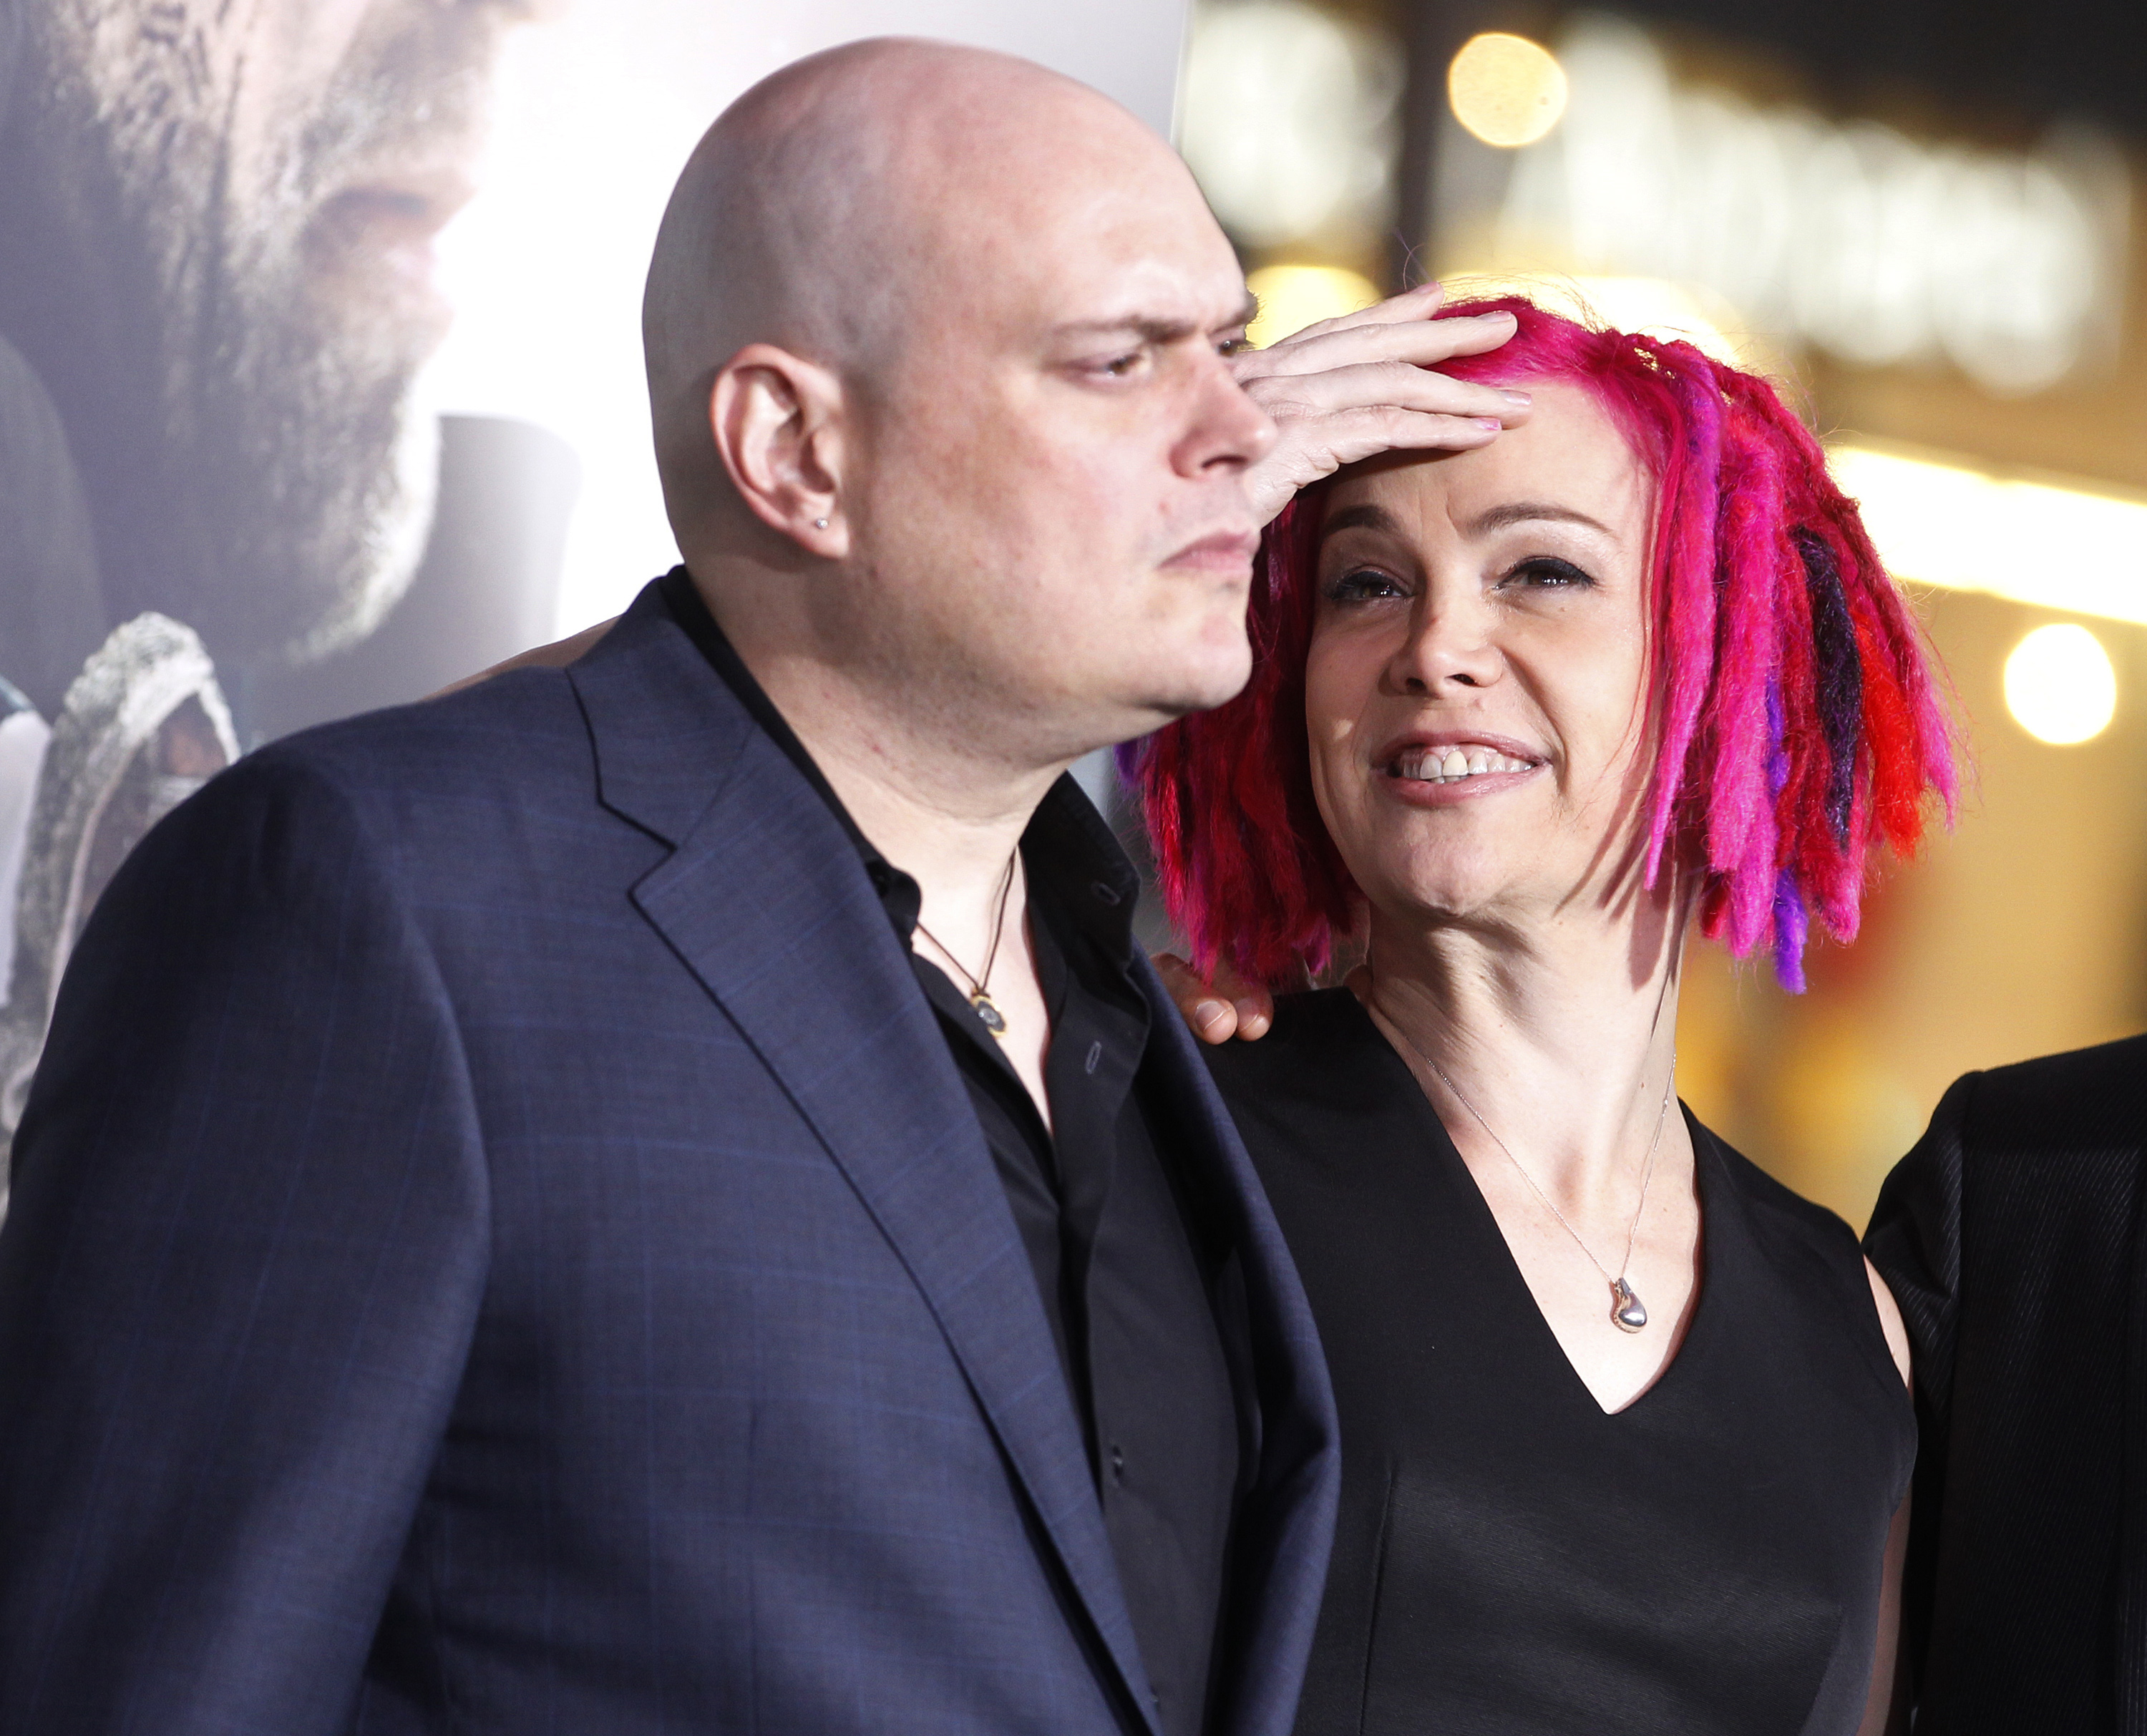 Lilly Wachowski prior to her transition, left, and sibling Lana Wachowski, the screenwriters, producers and directors of film <i>Cloud Atlas</i>, pose as they arrive for the film's premiere on Oct. 24, 2012 (Fred Prouser—Reuters)